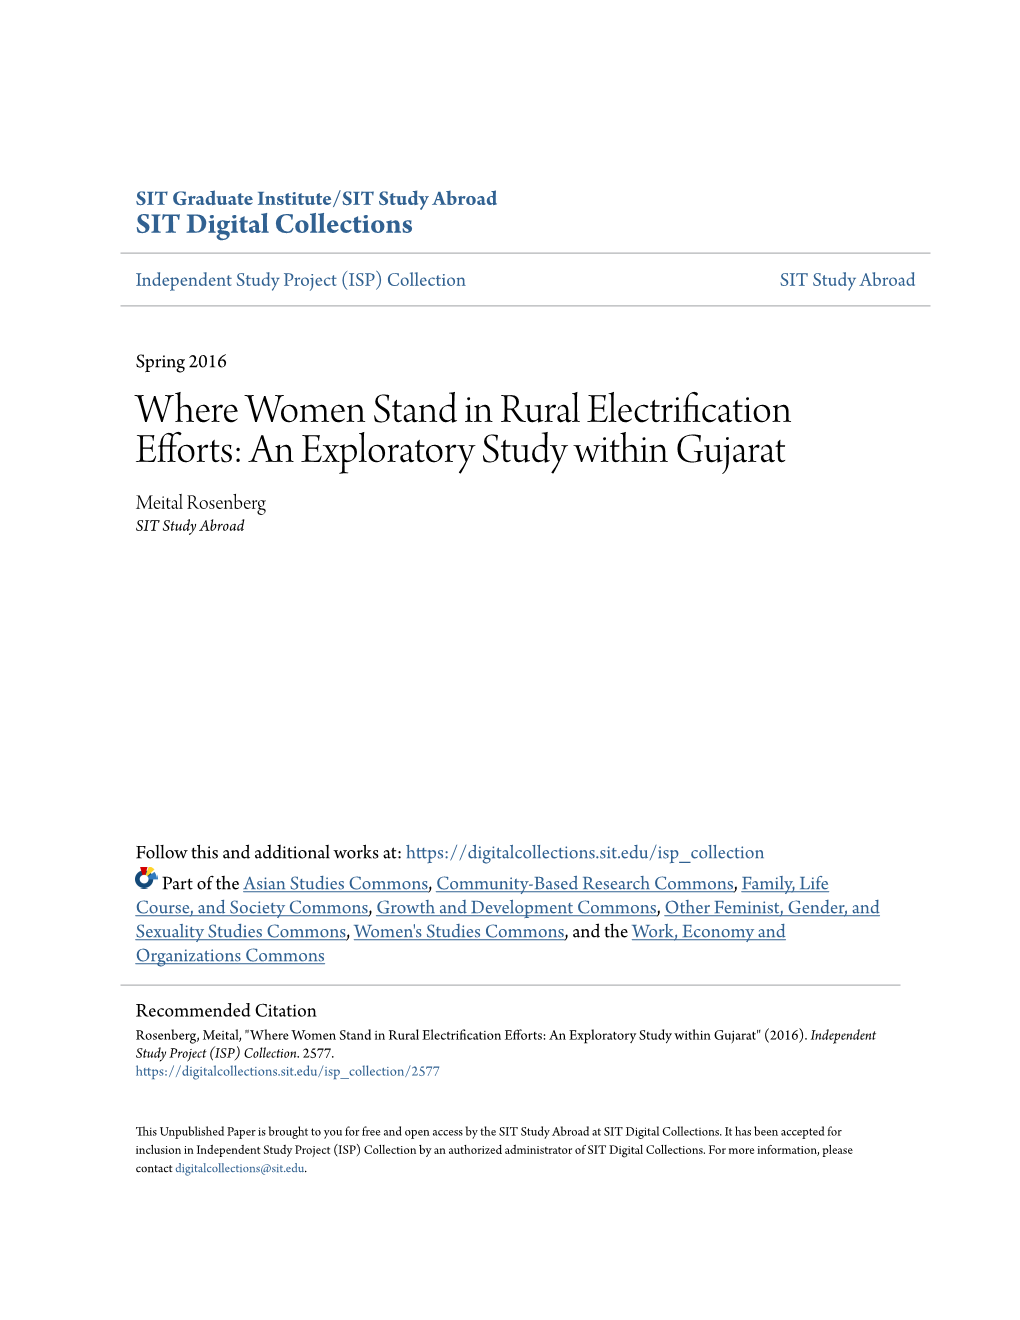 Where Women Stand in Rural Electrification Efforts: an Exploratory Study Within Gujarat Meital Rosenberg SIT Study Abroad